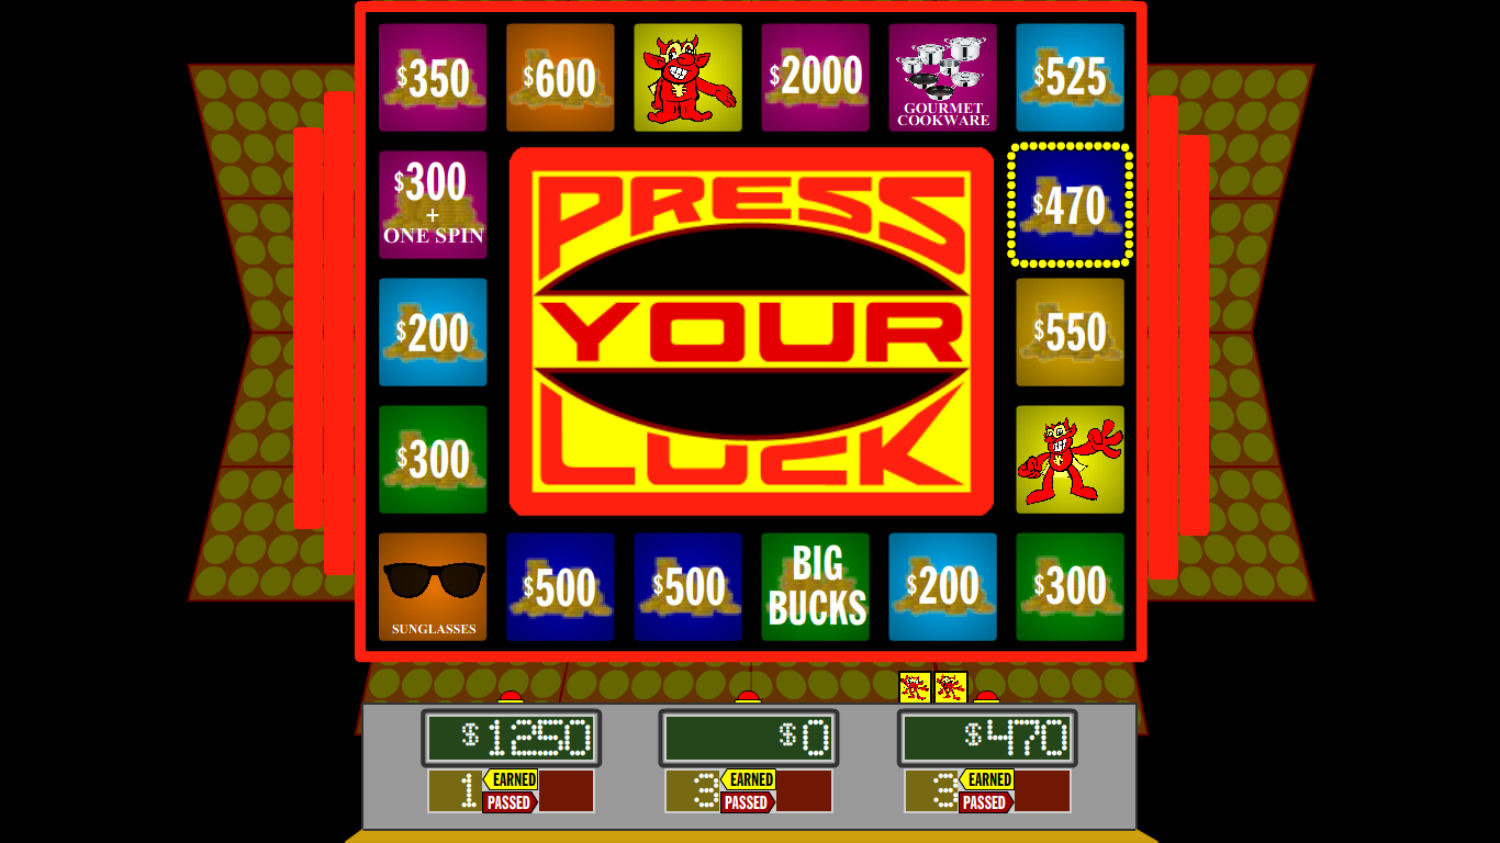 Press Your Luck Game Show Presentation Software for Windows Host Your